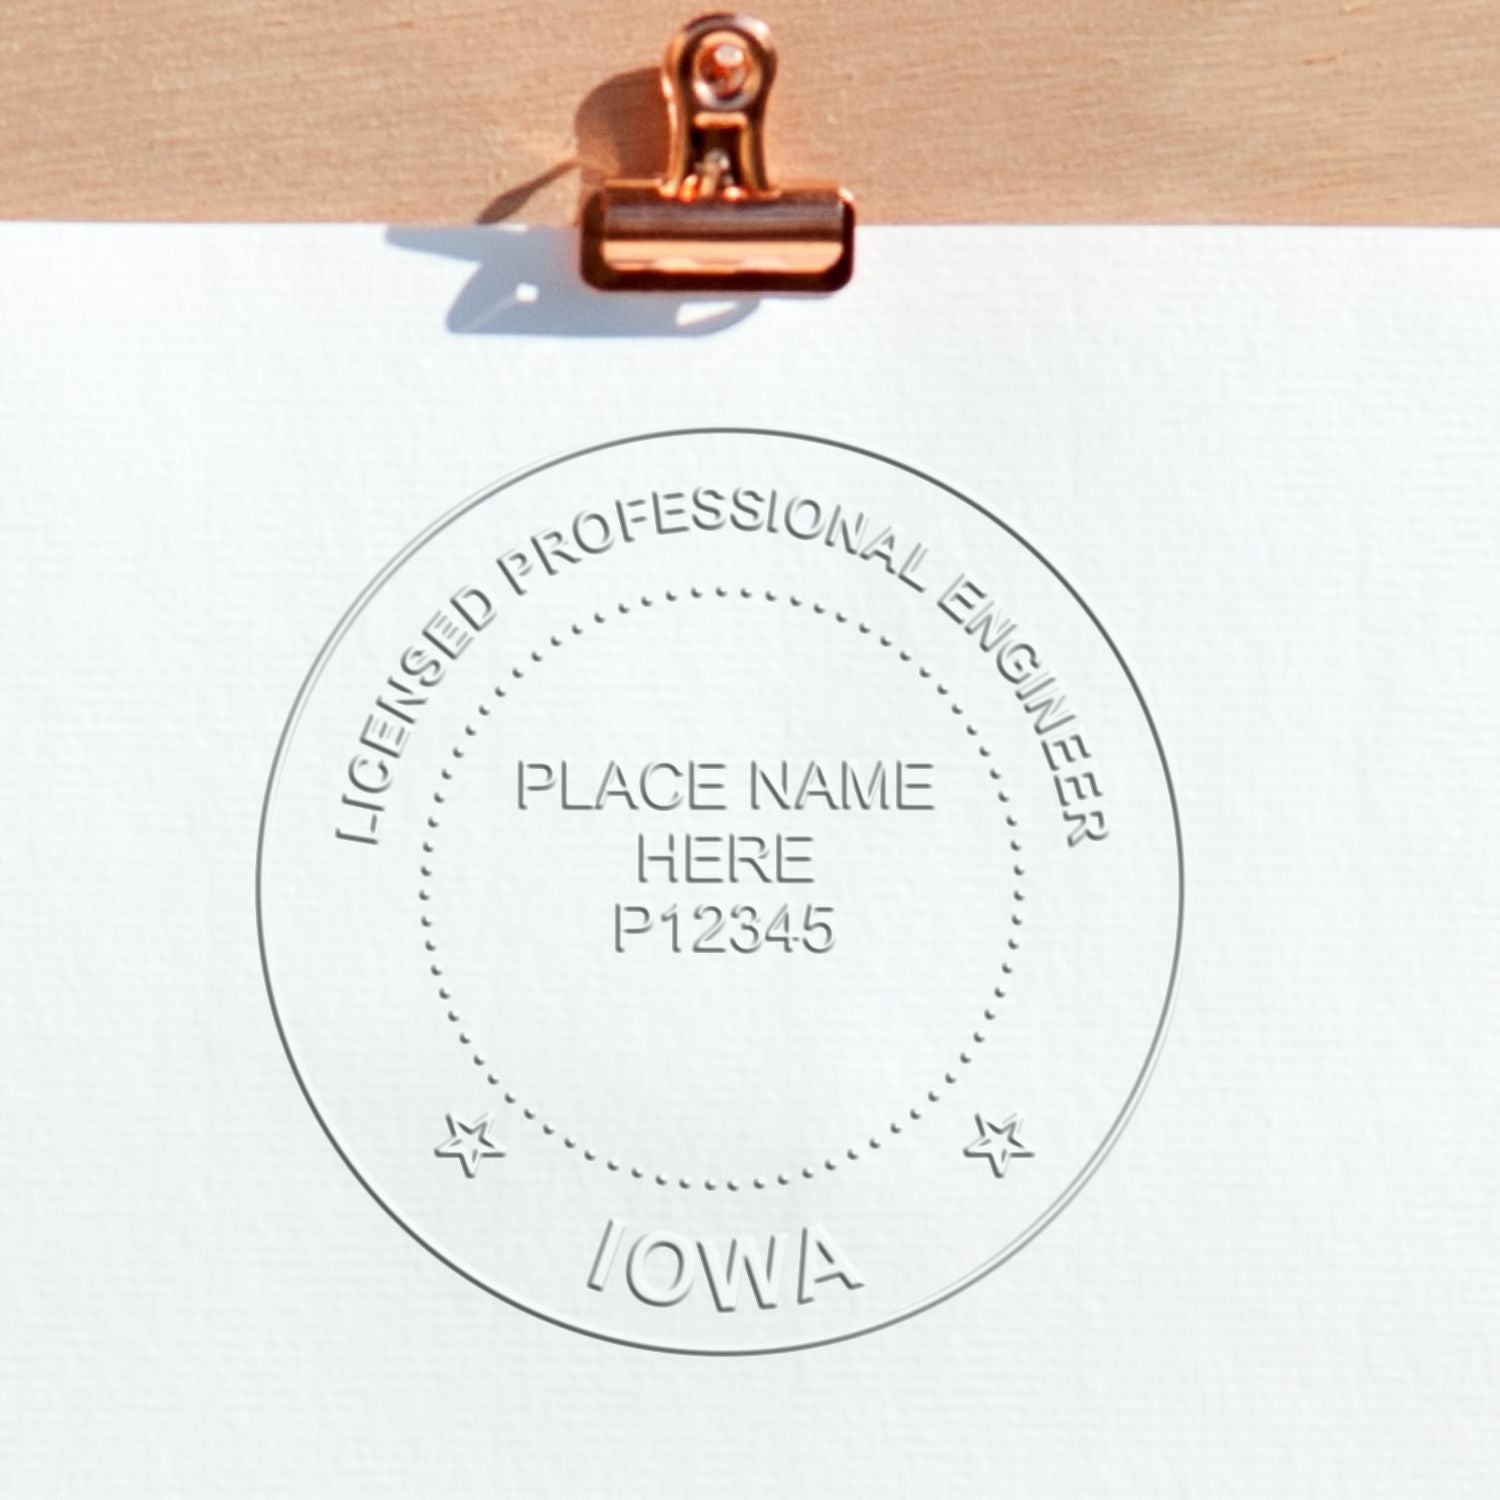 The State of Iowa Extended Long Reach Engineer Seal stamp impression comes to life with a crisp, detailed photo on paper - showcasing true professional quality.